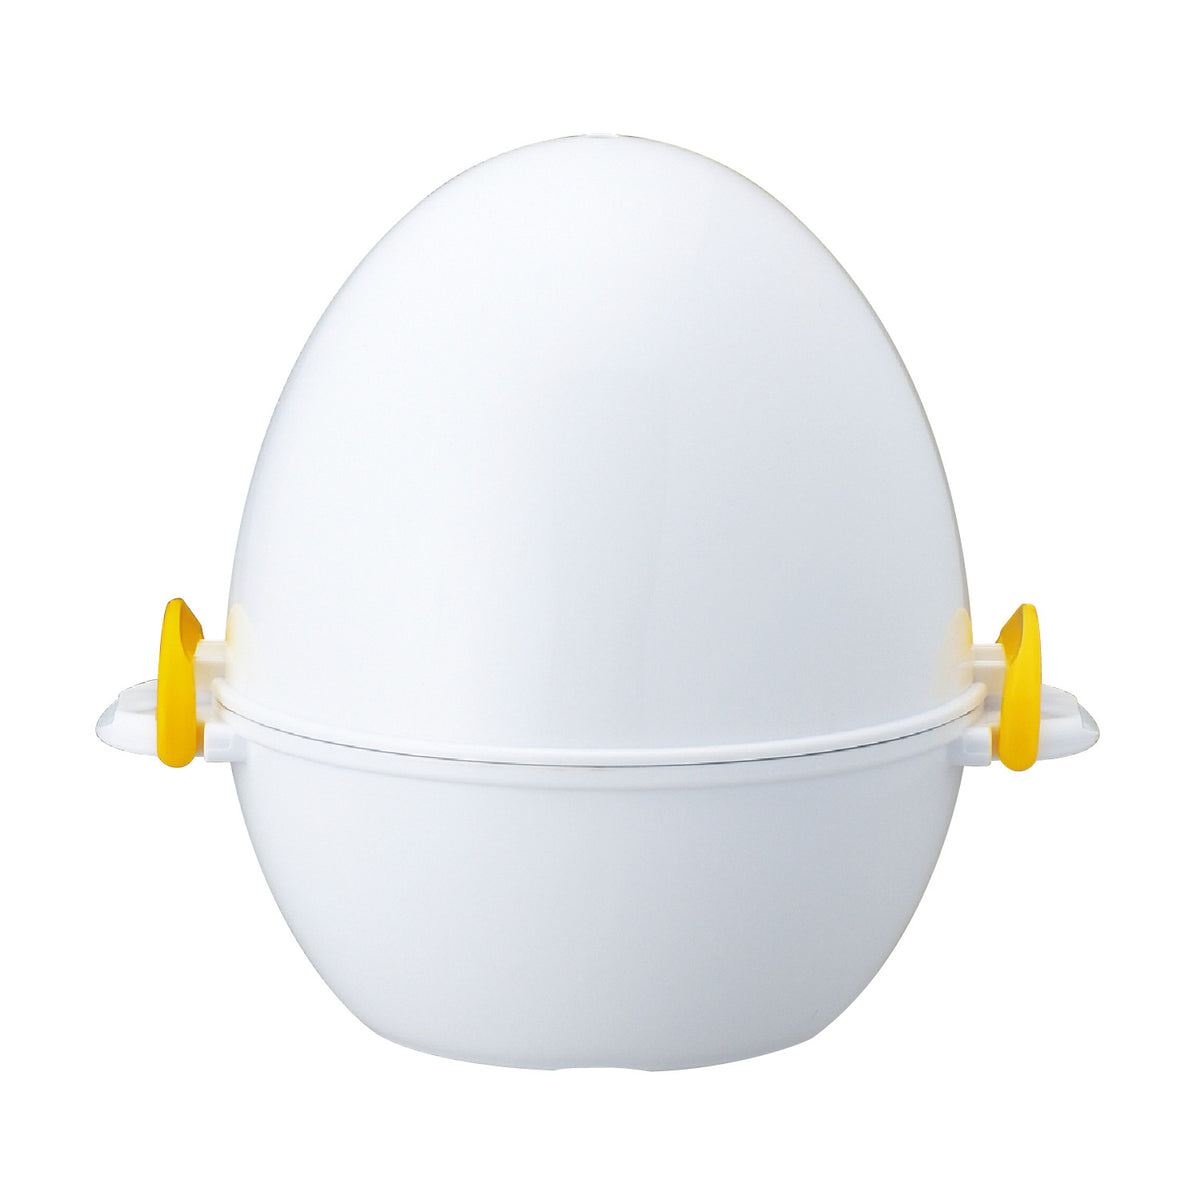 As Seen On TV 2-in-1 Microwave Egg Pod